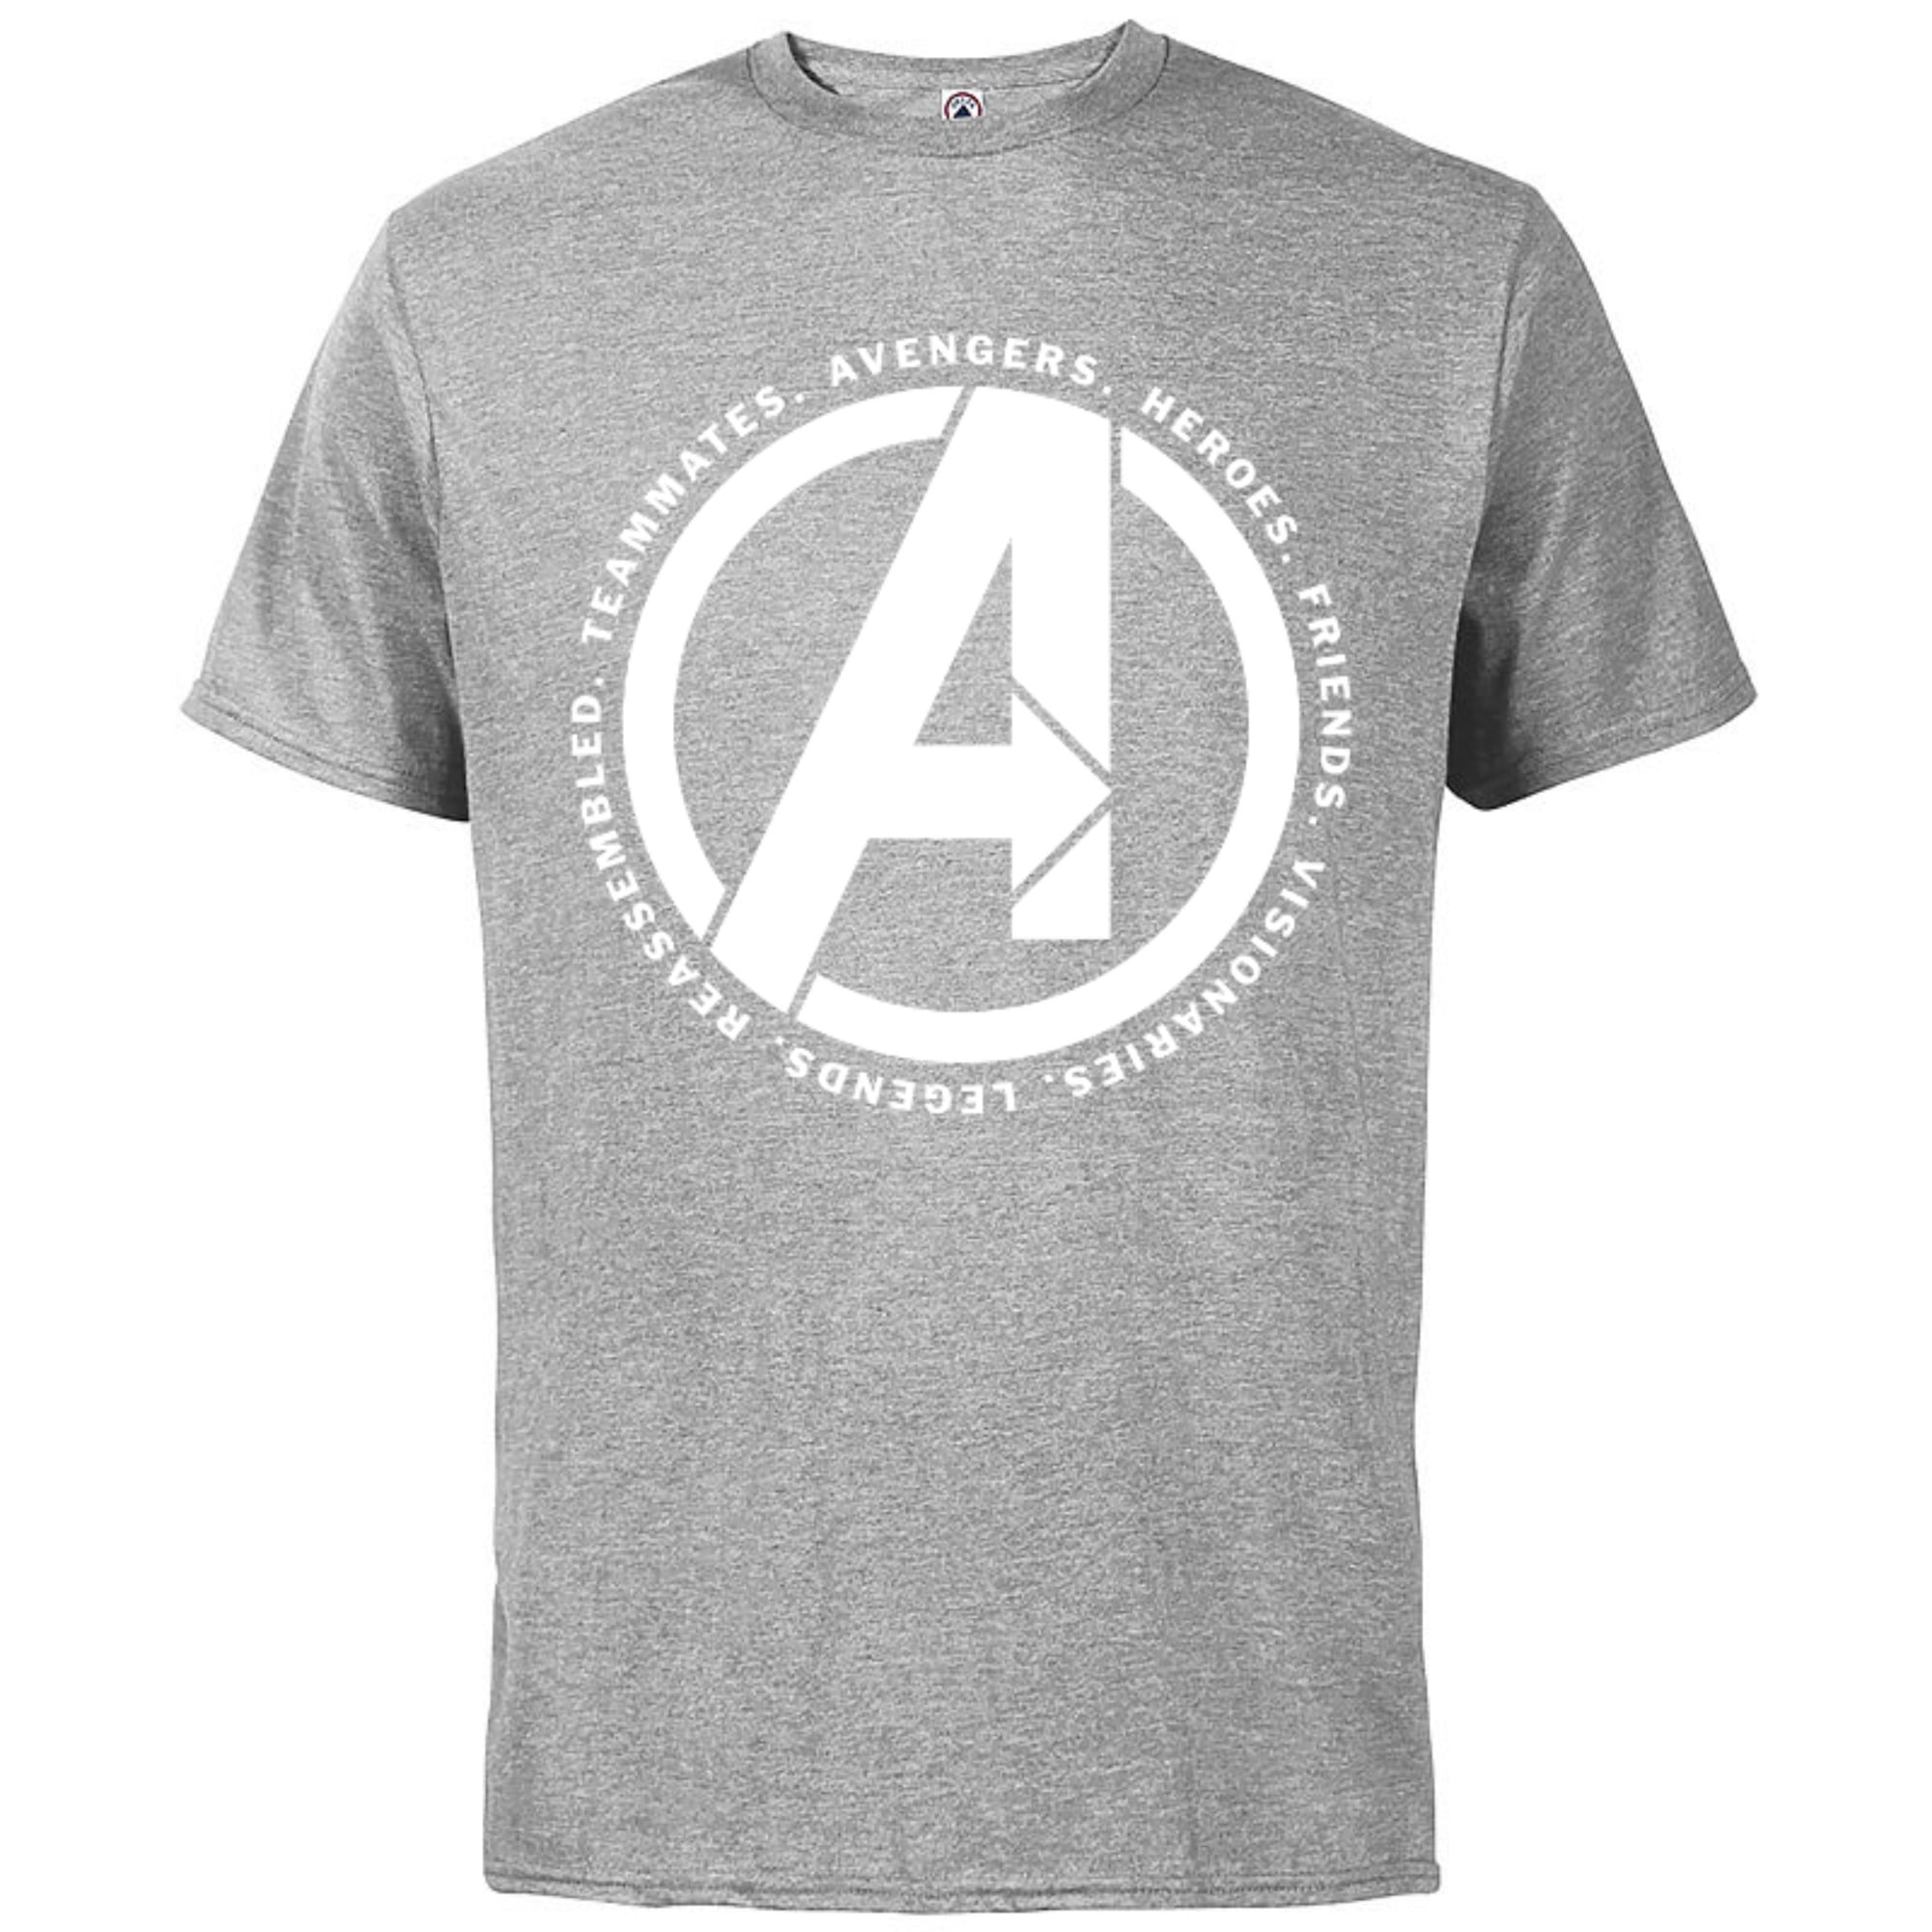 Marvel Avengers: Endgame Logo Heroes and Legends - Short Sleeve Cotton T- Shirt for Adults - Customized-Black